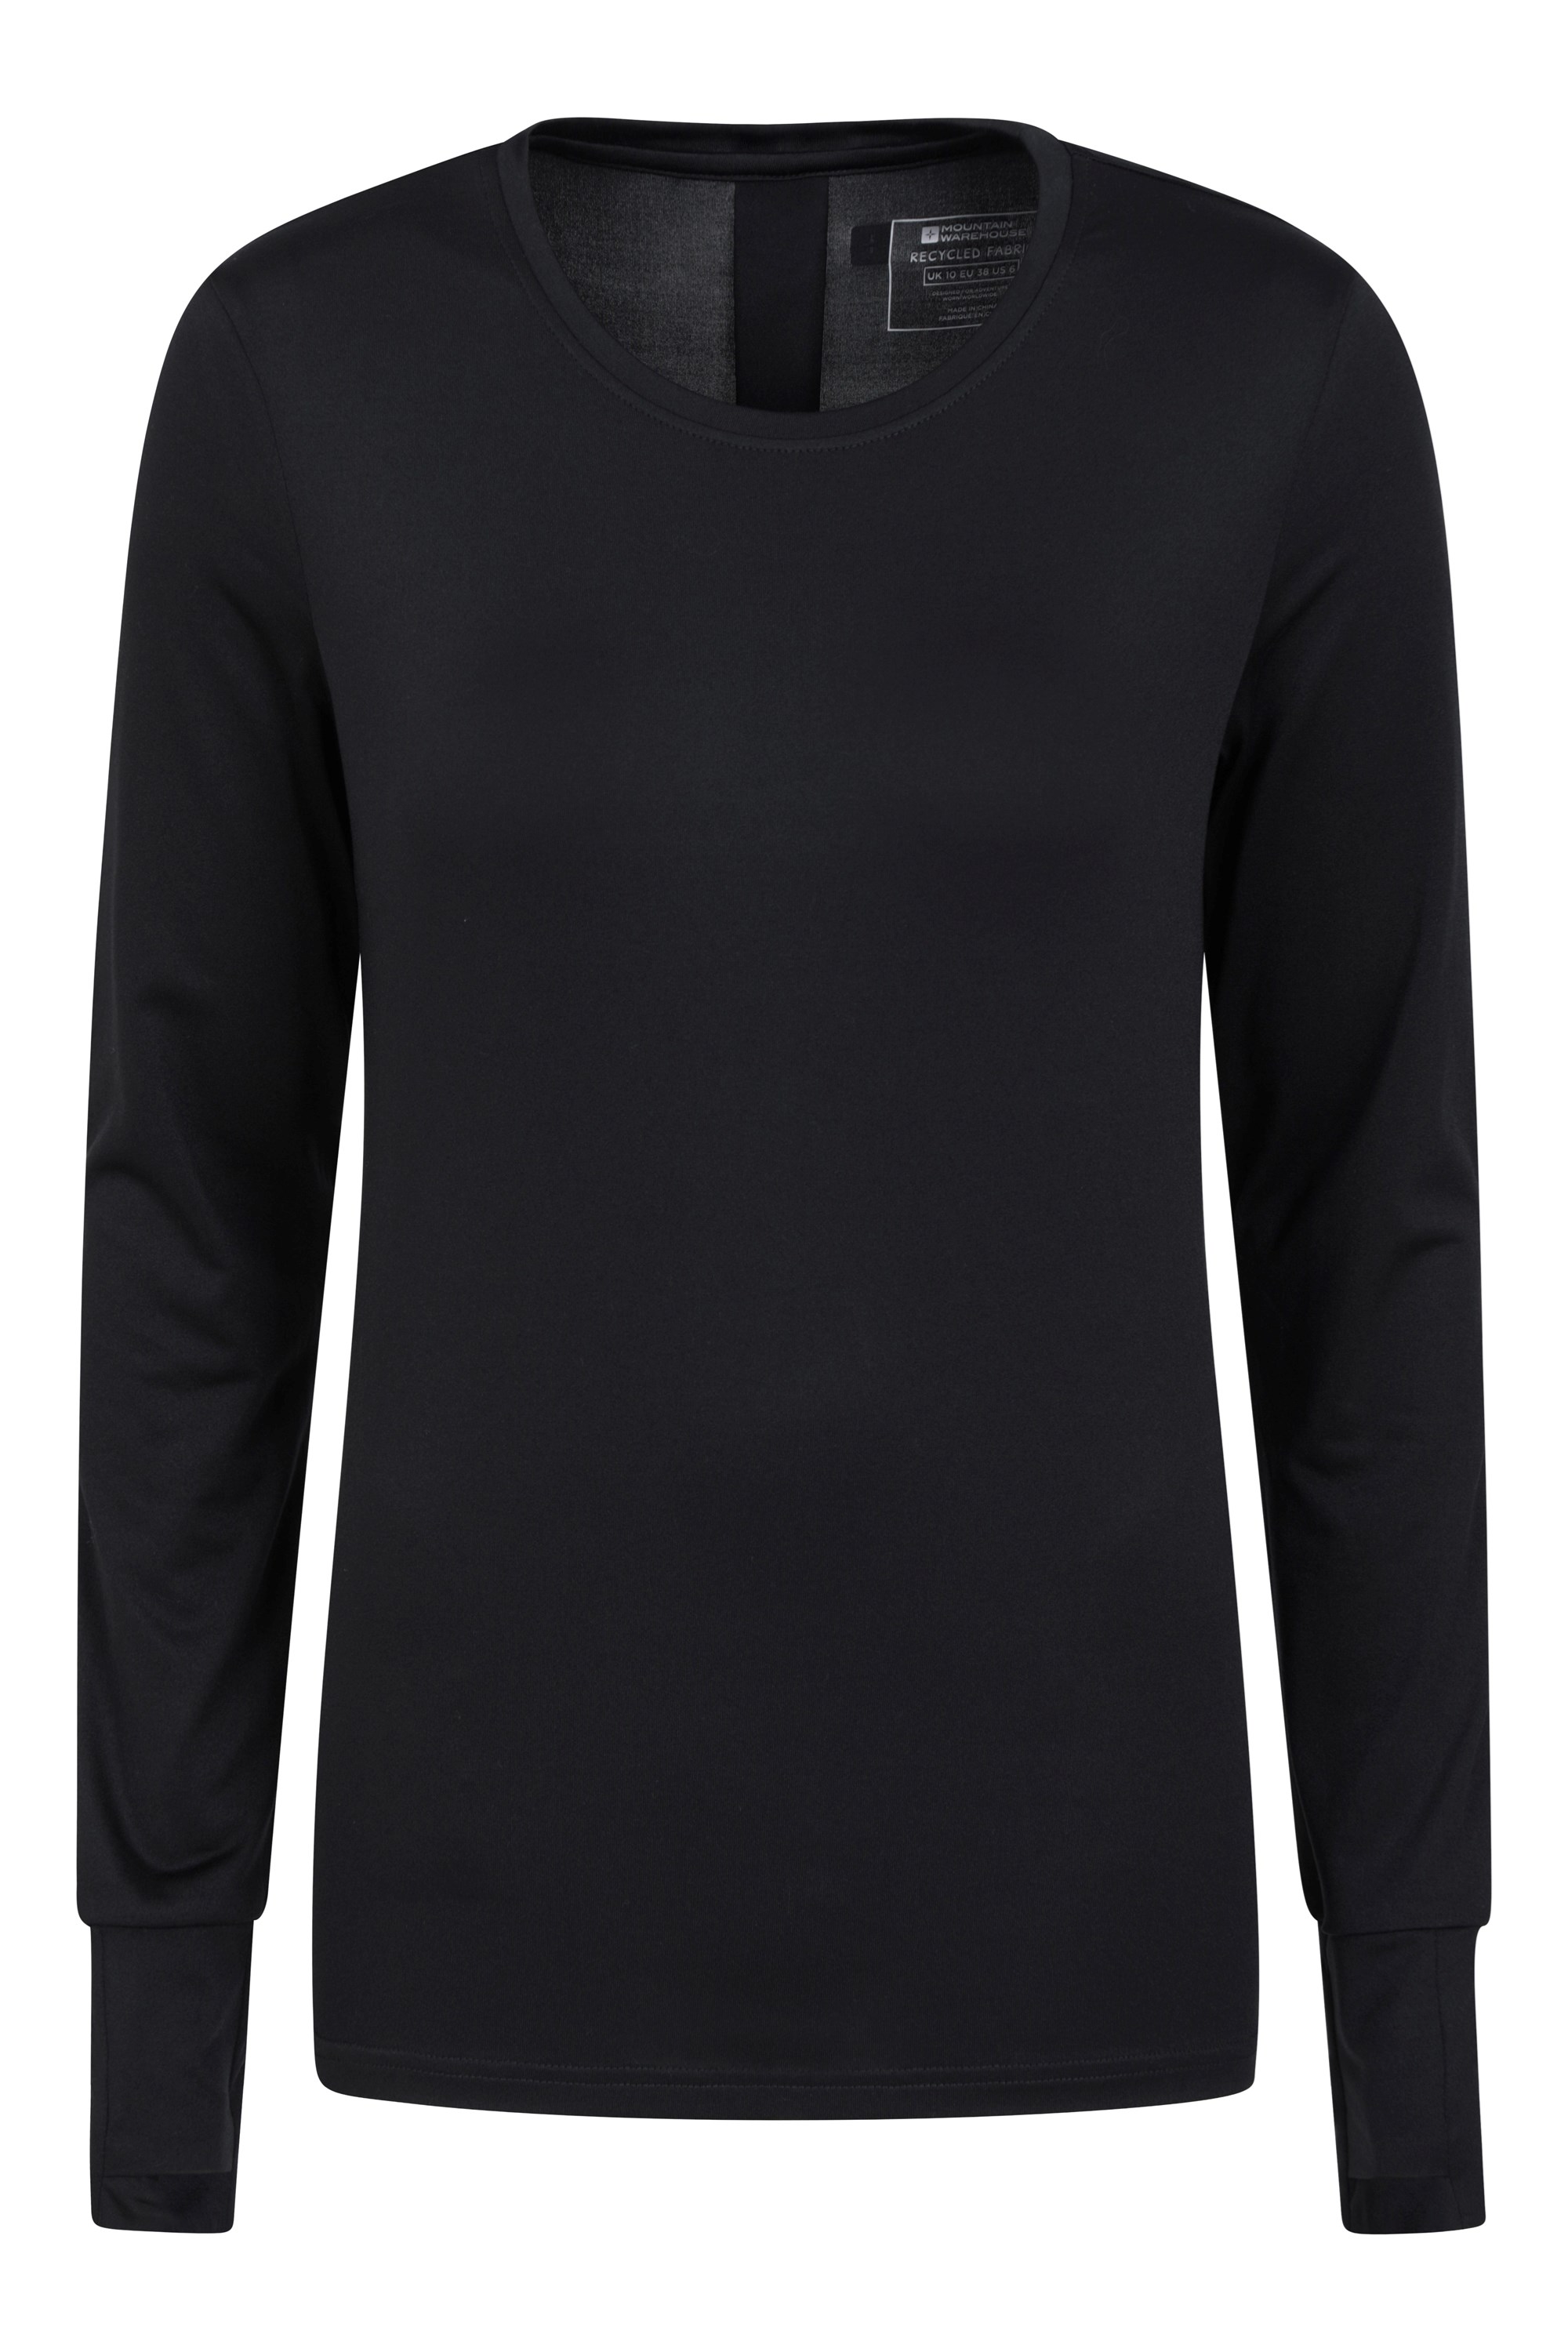 Womens Recycled Active Top - Black